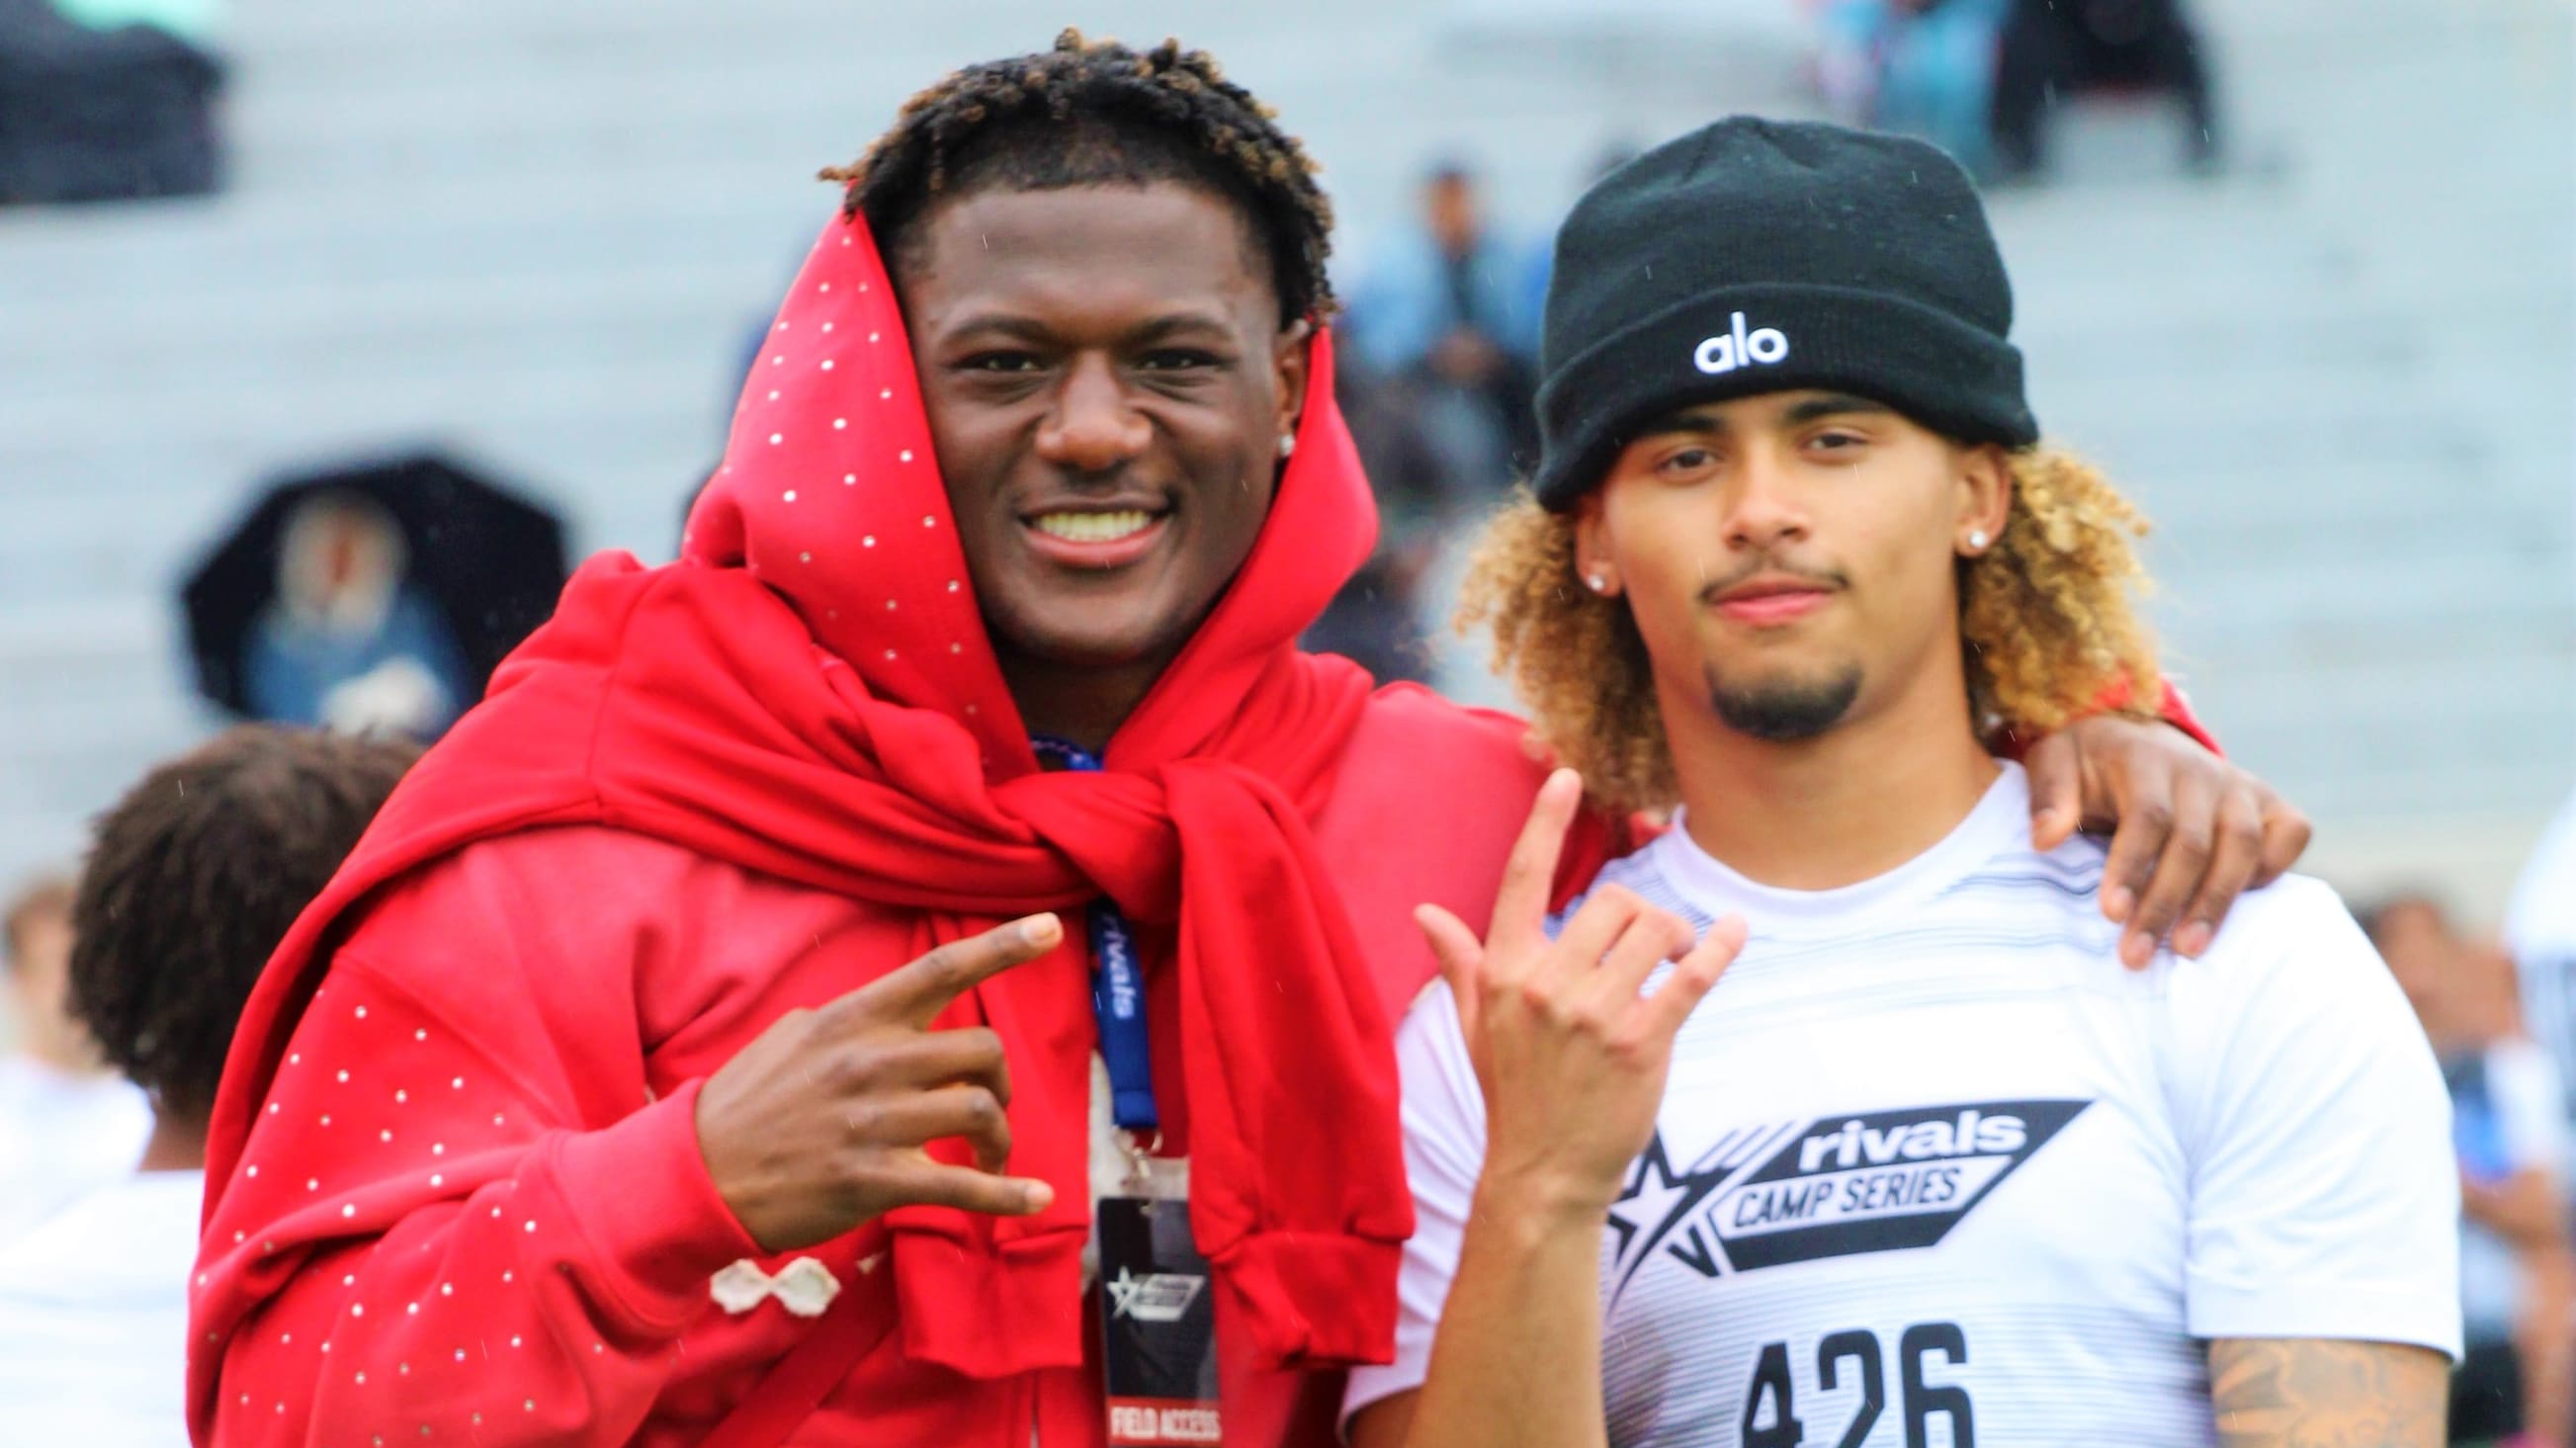 Nebraska’s Chief Borders Hangs Out With Top QB Recruit